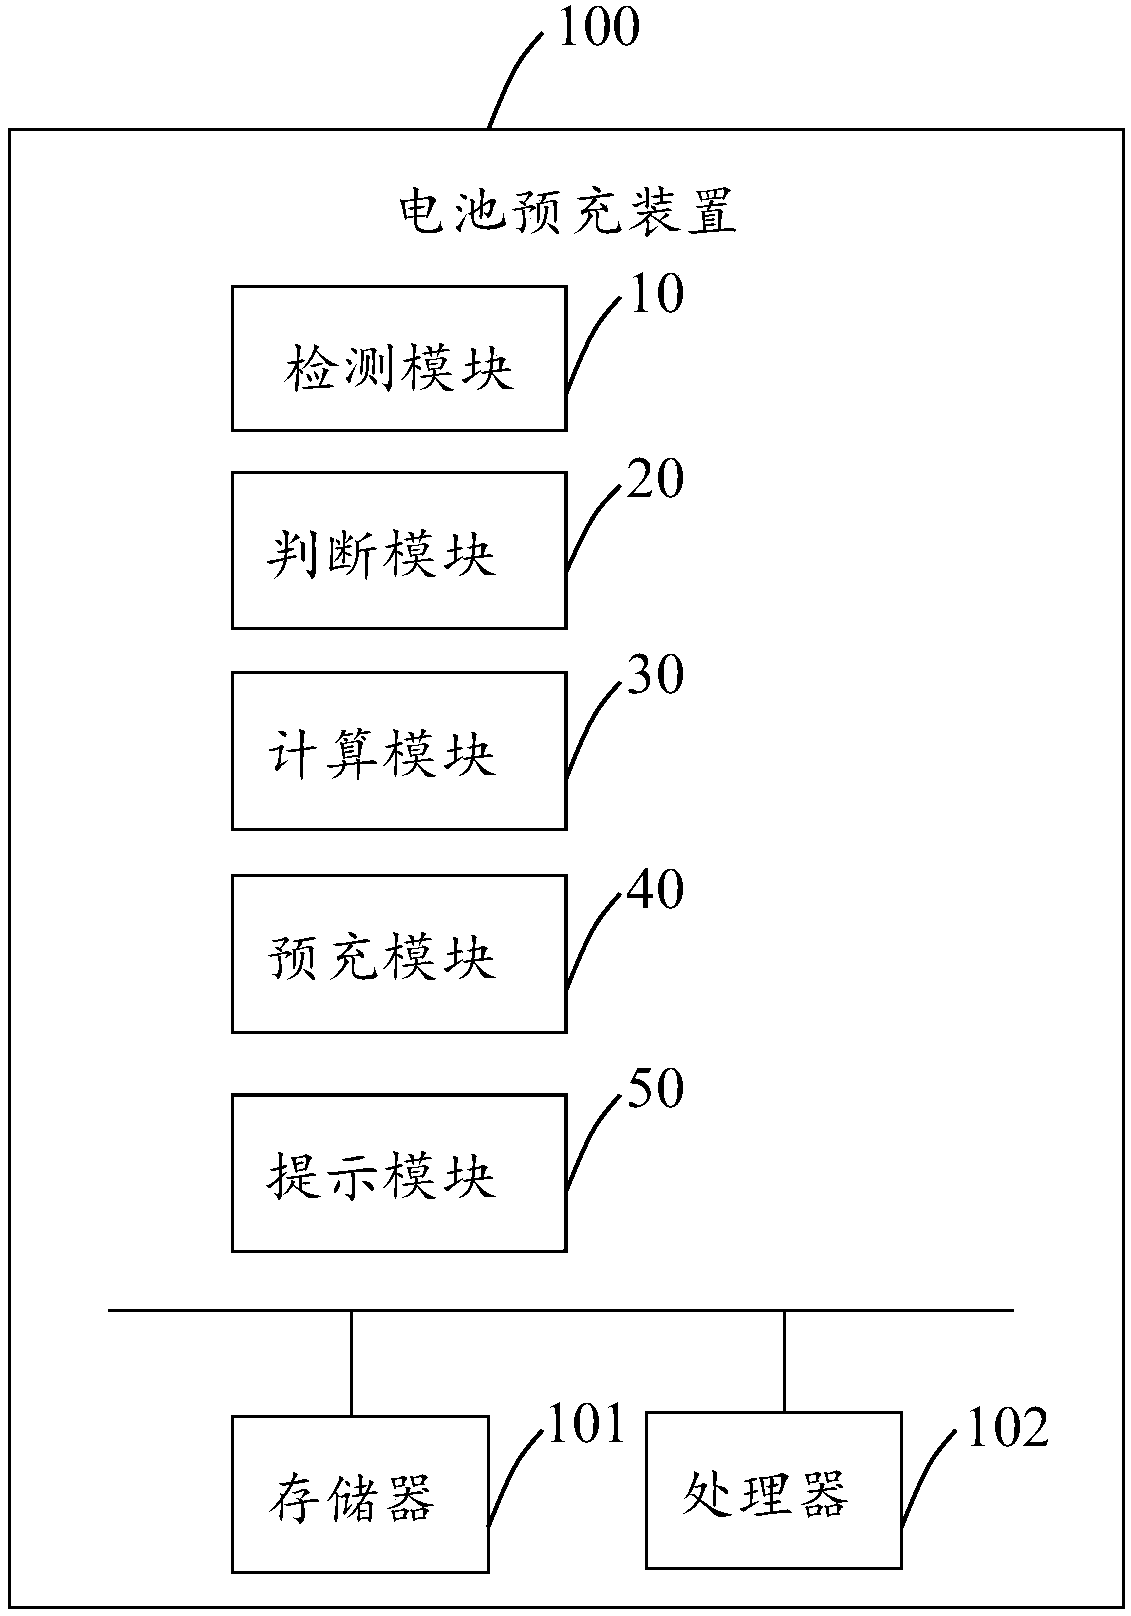 Battery pre-charging device and method